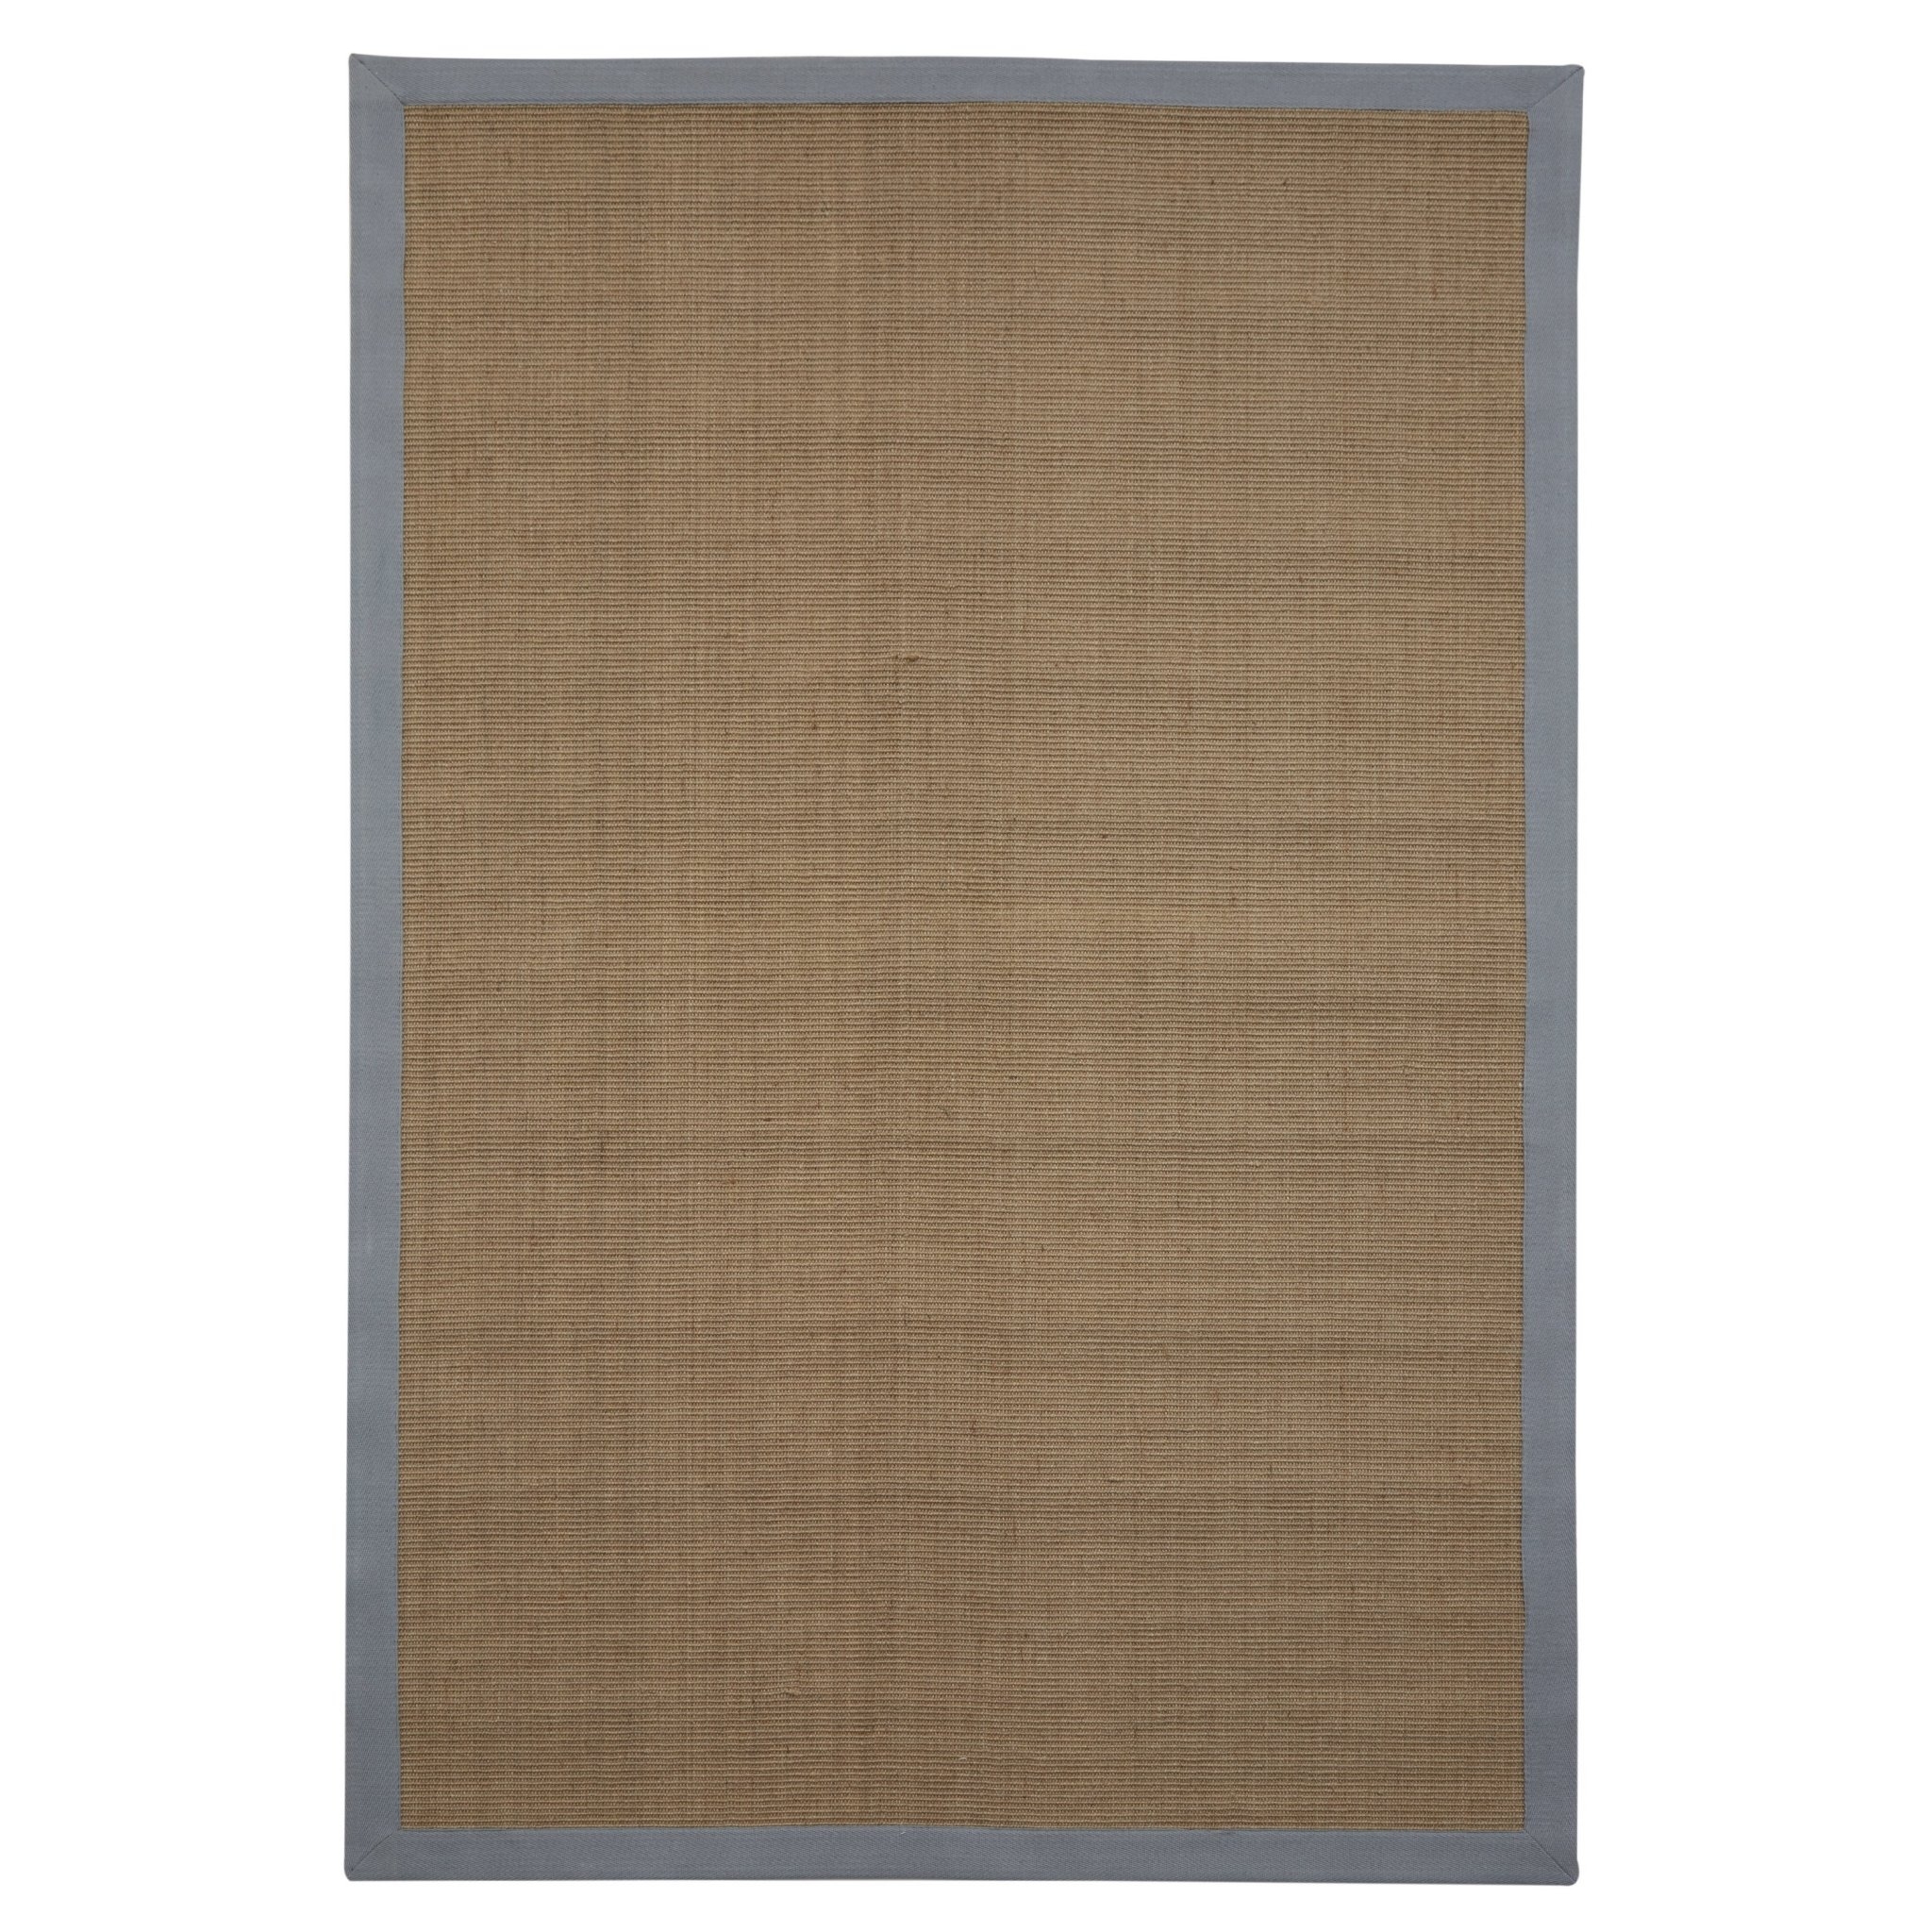 Chelsea Jute Rug with Cotton Grey Border 120x180cm by Native Home & Lifestyle – Furniture & Homeware – The Luxe Home